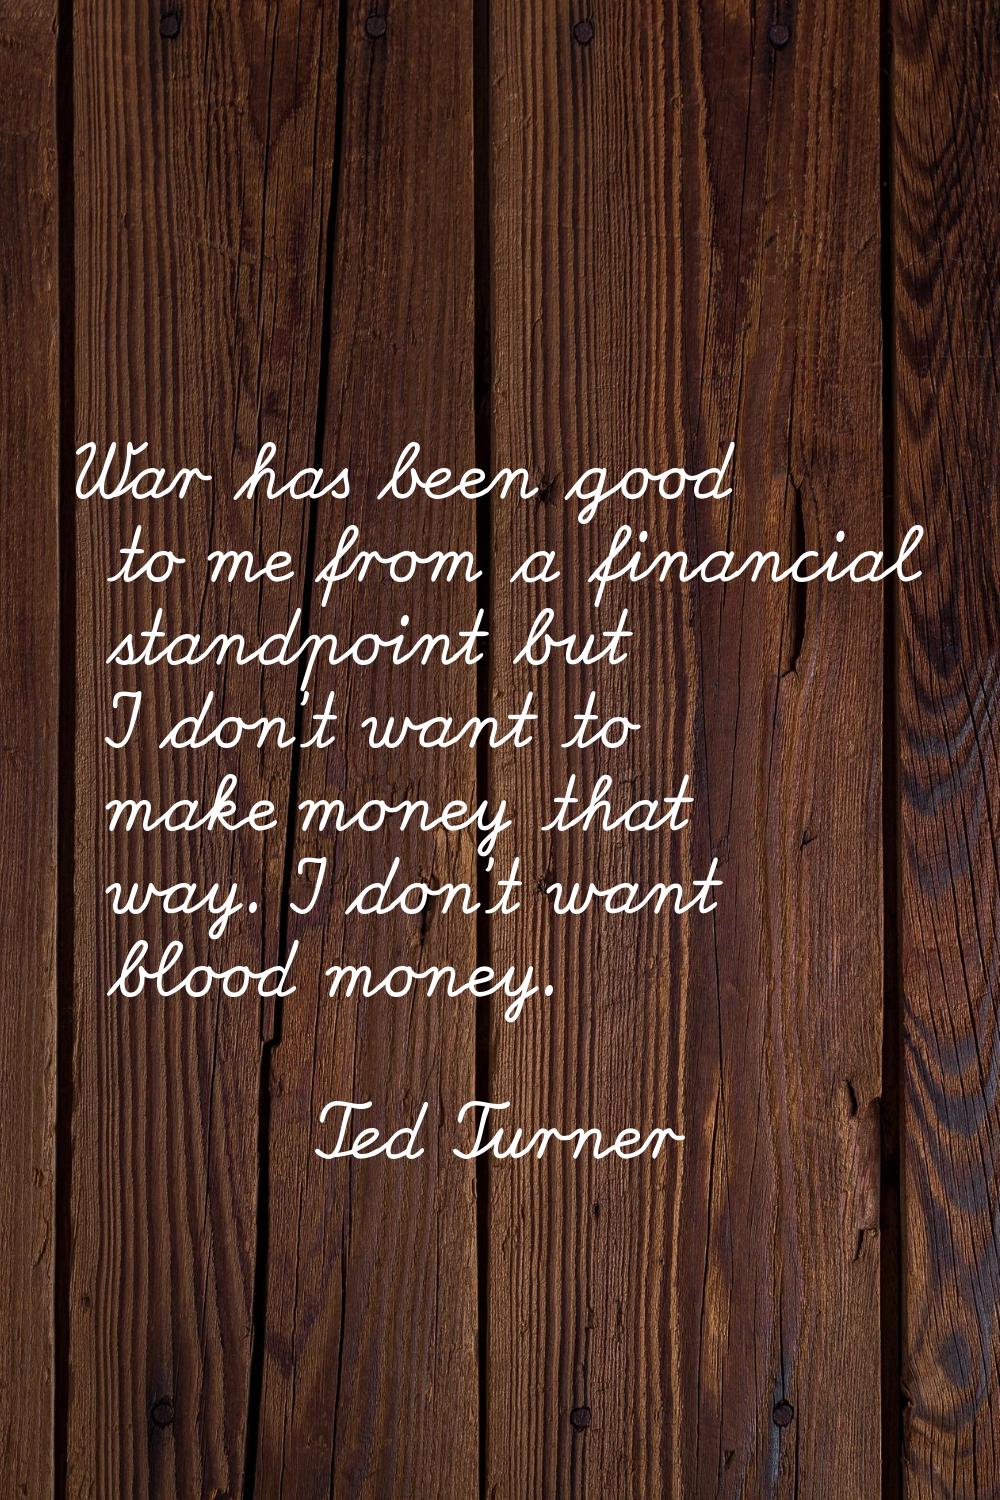 War has been good to me from a financial standpoint but I don't want to make money that way. I don'